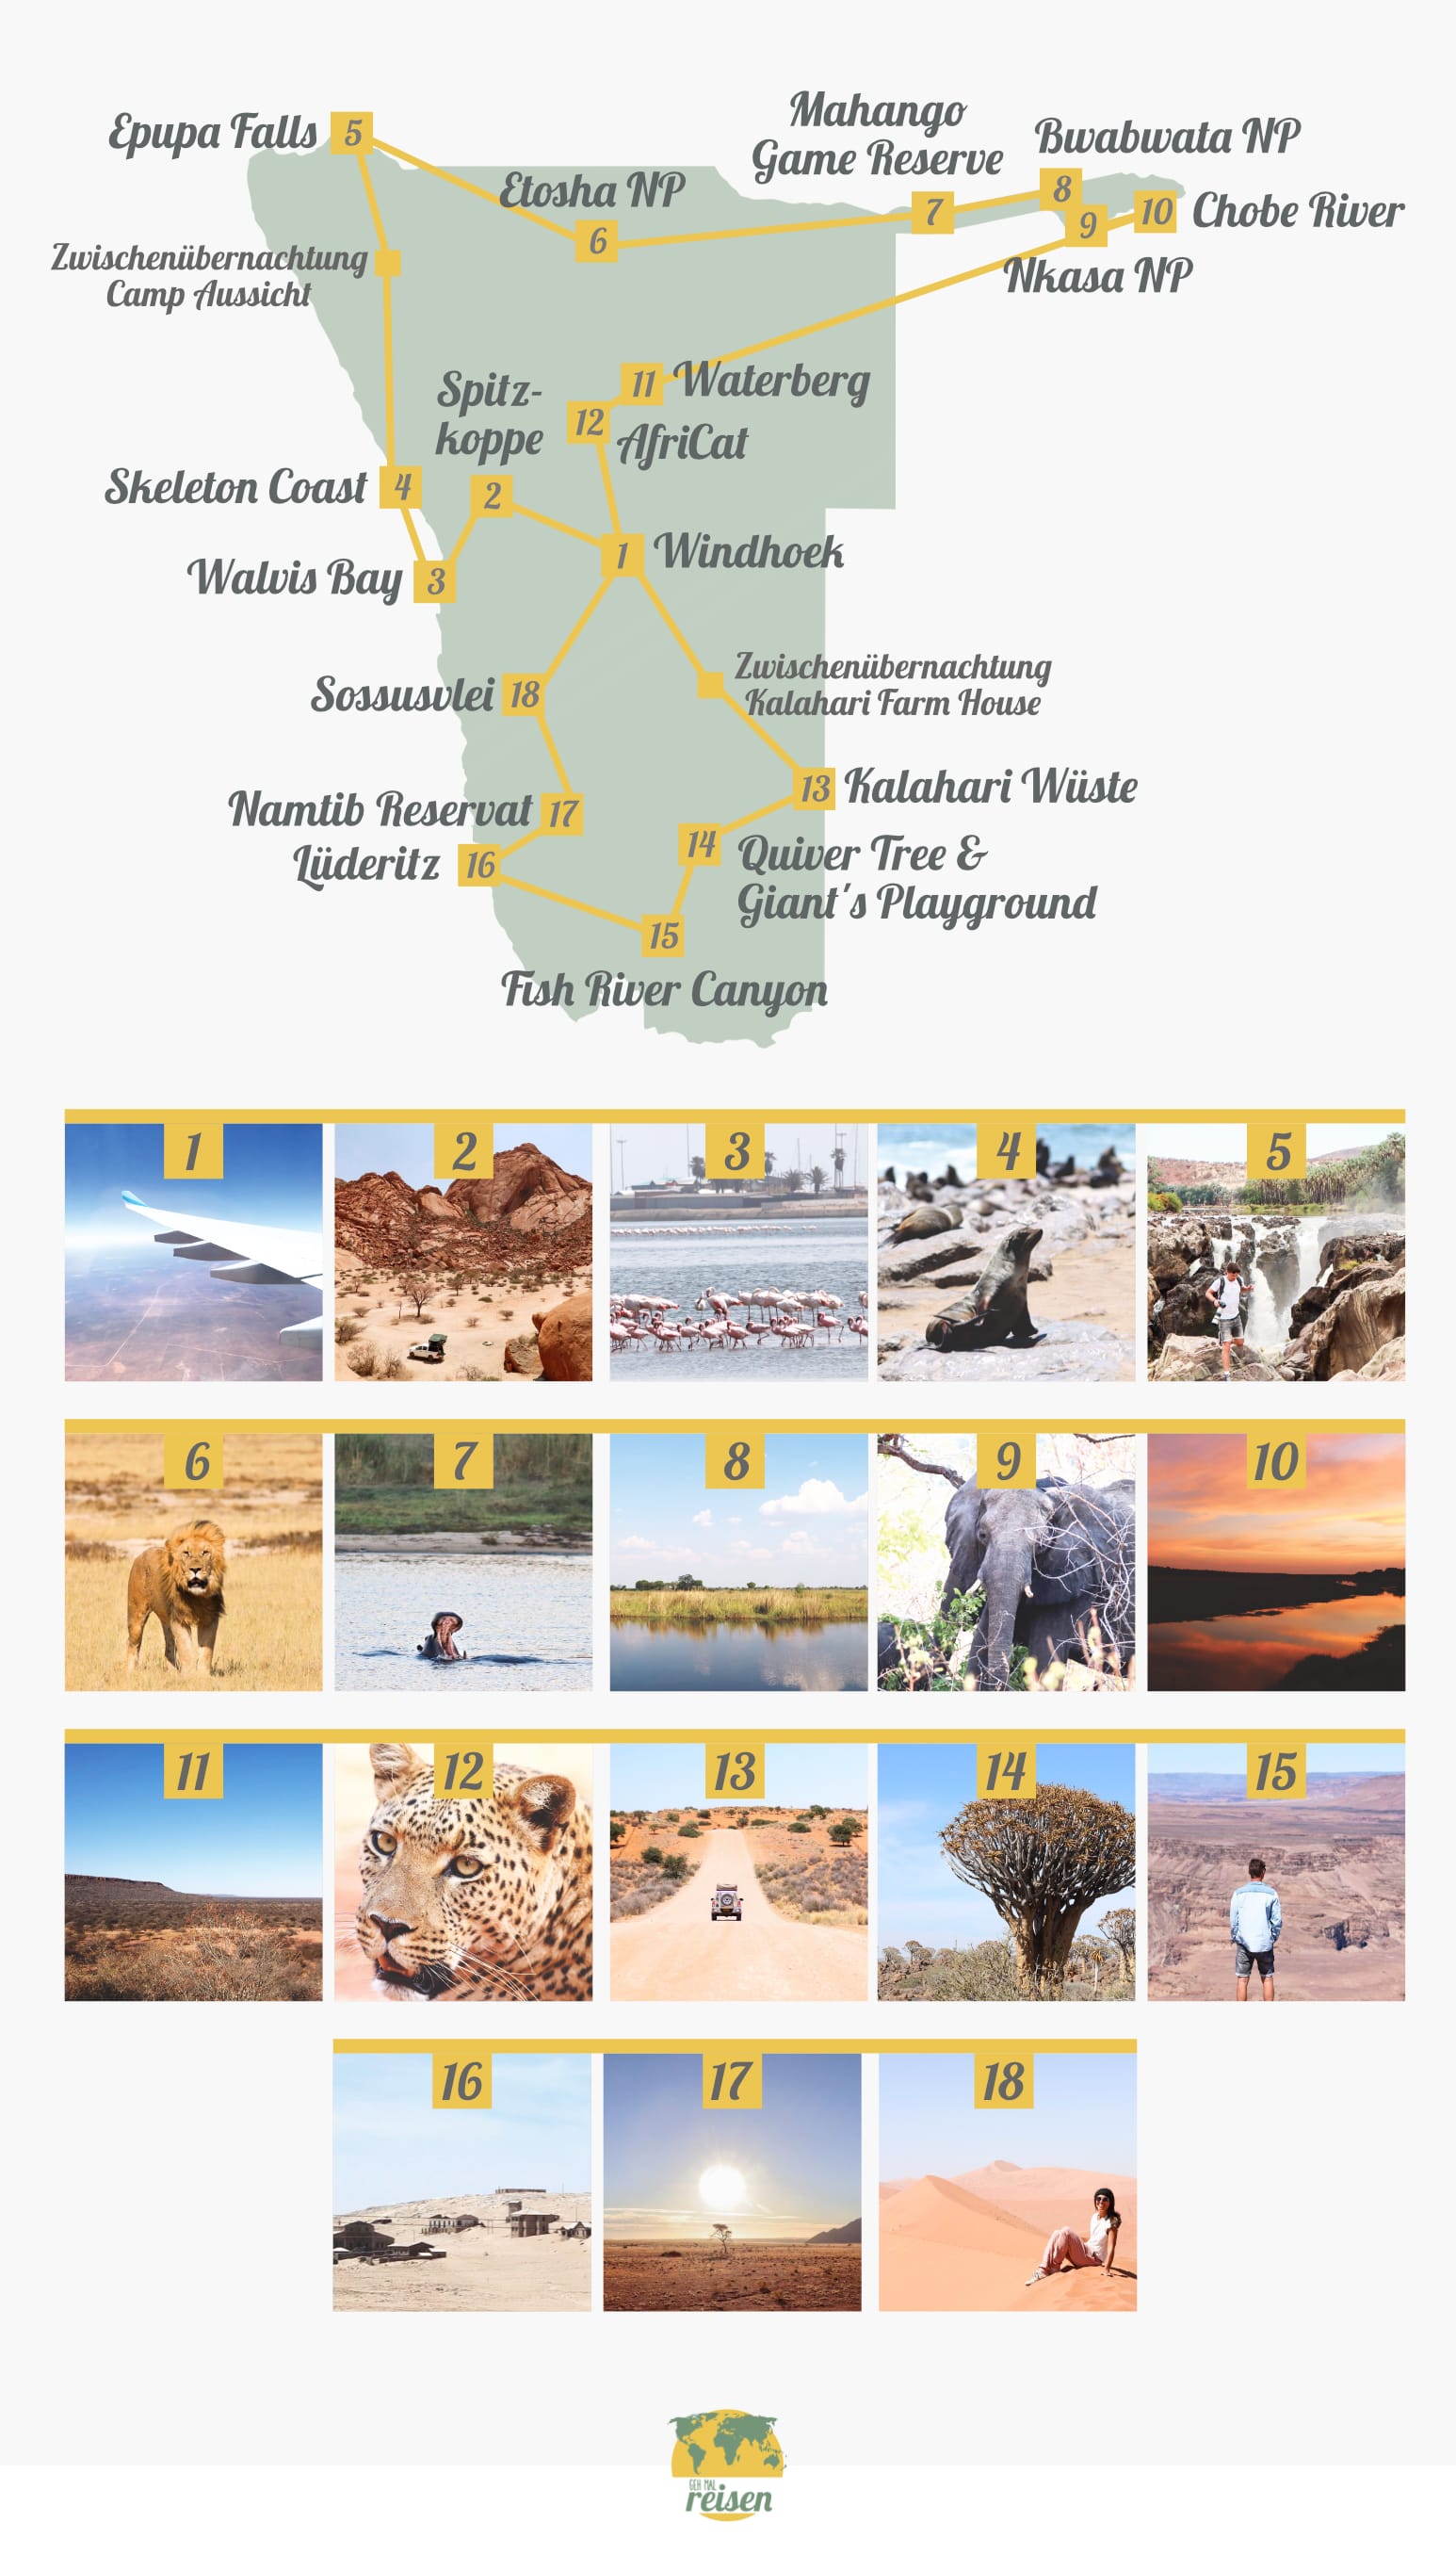 Unsere Route als Selbstfahrer in Namibia